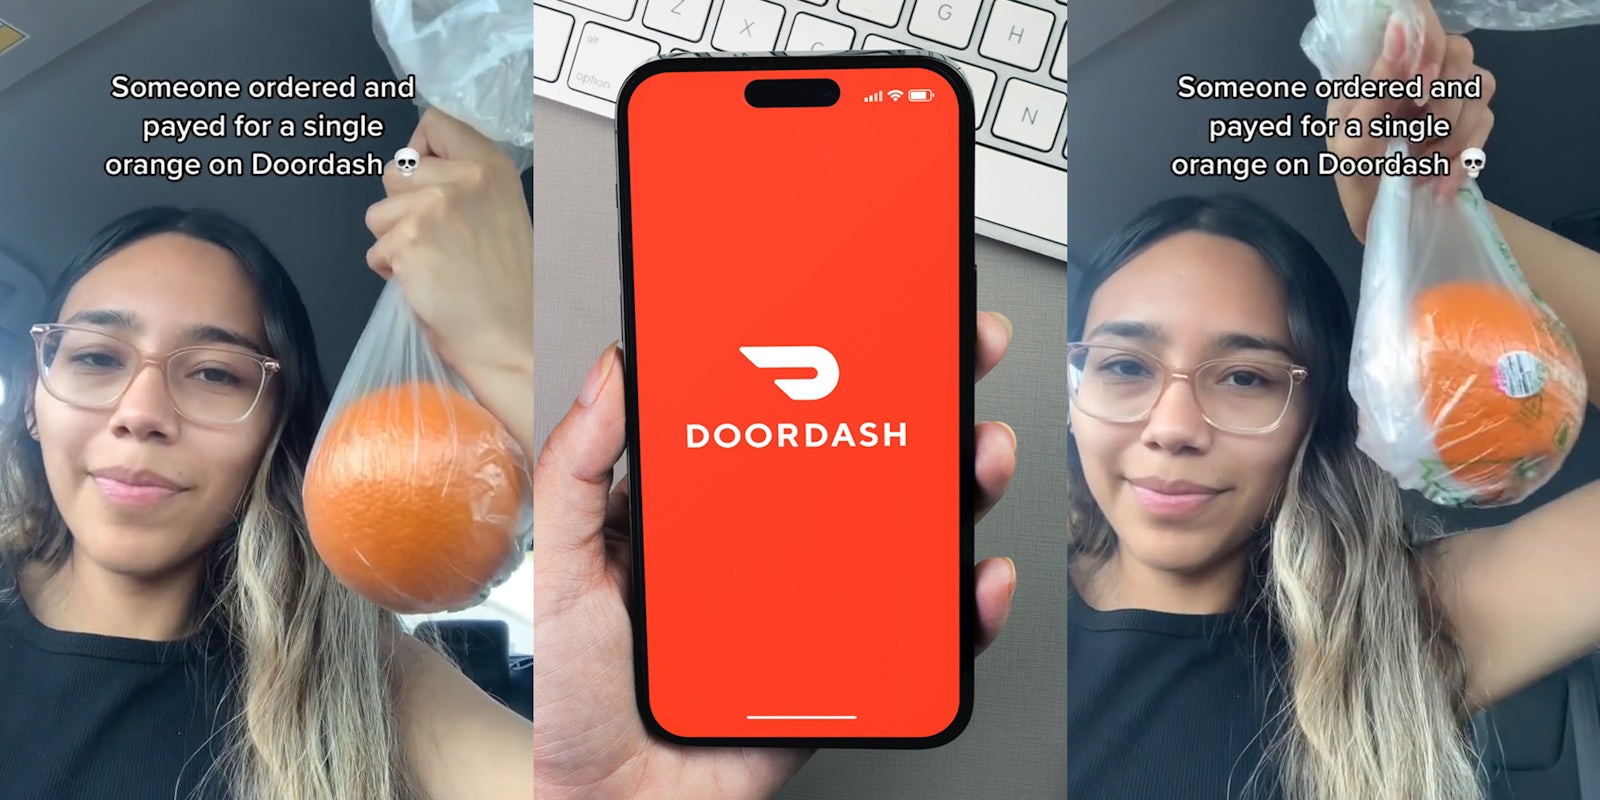 DoorDasher in car holding up orange in bag with caption 'Someone ordered and payed for a single orange on DoorDash' (l) DoorDash on phone screen in hand in front of white keyboard and grey background (c) DoorDasher in car holding up orange in bag with caption 'Someone ordered and payed for a single orange on DoorDash' (r)